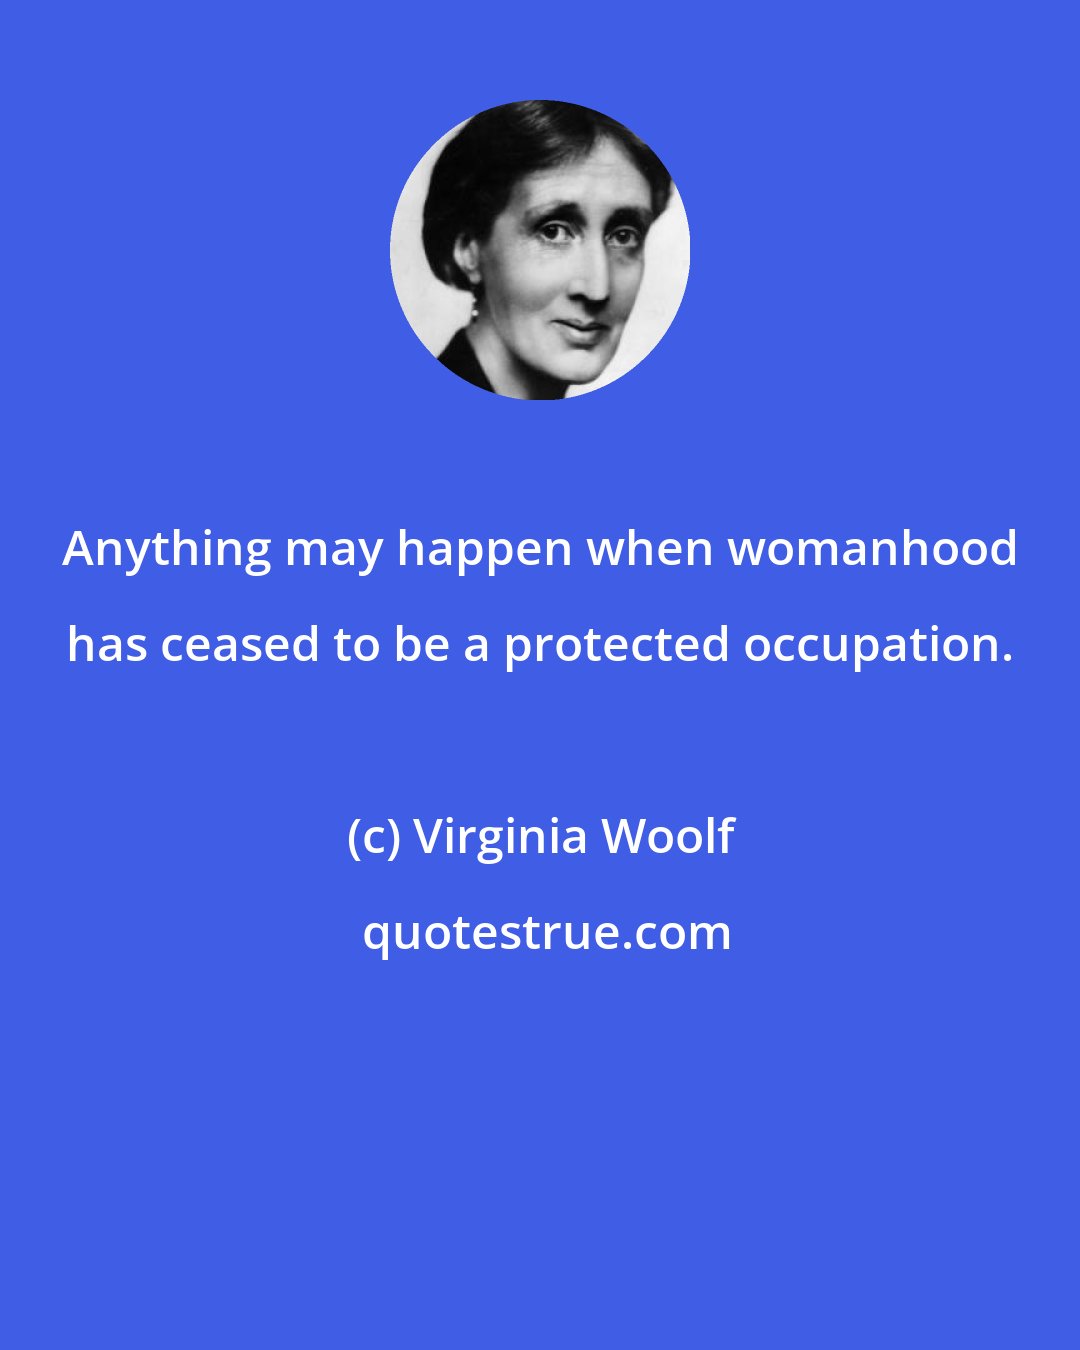 Virginia Woolf: Anything may happen when womanhood has ceased to be a protected occupation.